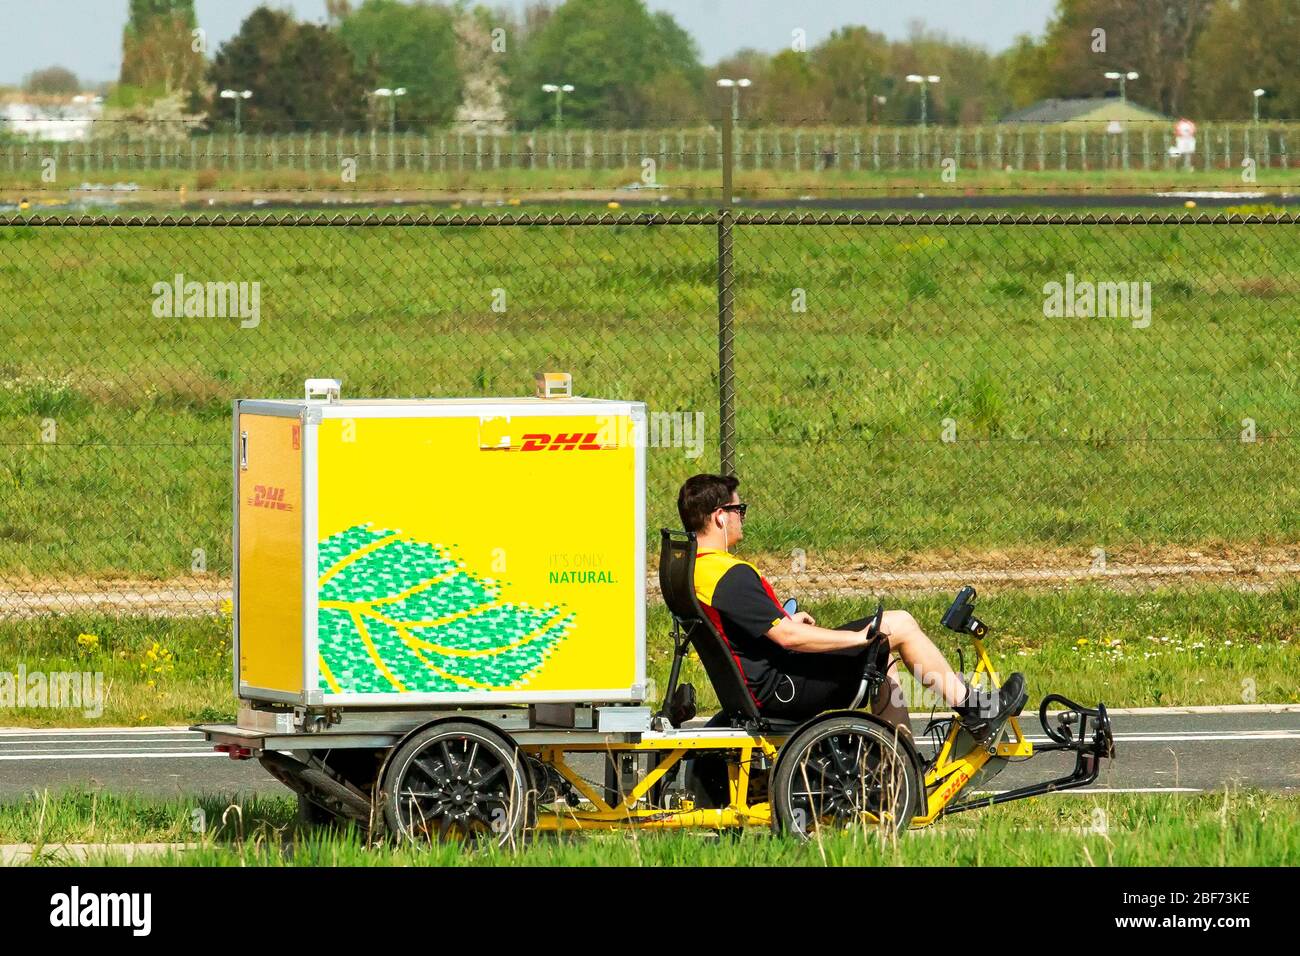 16 april 2020 Maastricht, The Netherlands Airplanes leaving the Airport DHL pakketbezorger met ligfiets en bagagebak  DHL parcel delivery with recumbent bike and luggage compartment Stock Photo